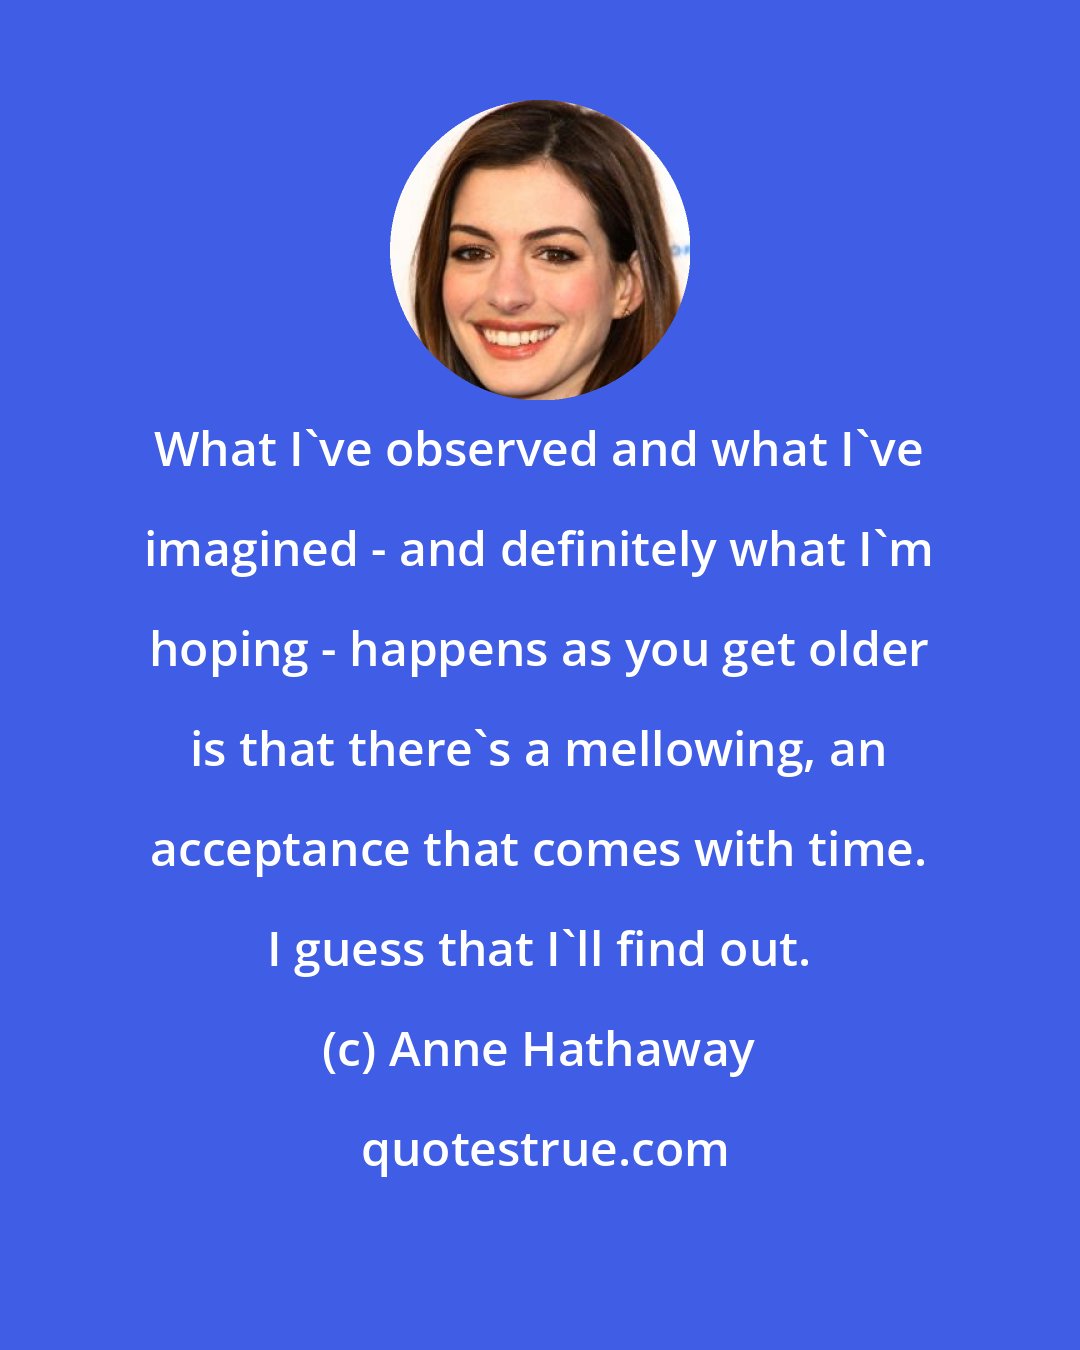 Anne Hathaway: What I've observed and what I've imagined - and definitely what I'm hoping - happens as you get older is that there's a mellowing, an acceptance that comes with time. I guess that I'll find out.